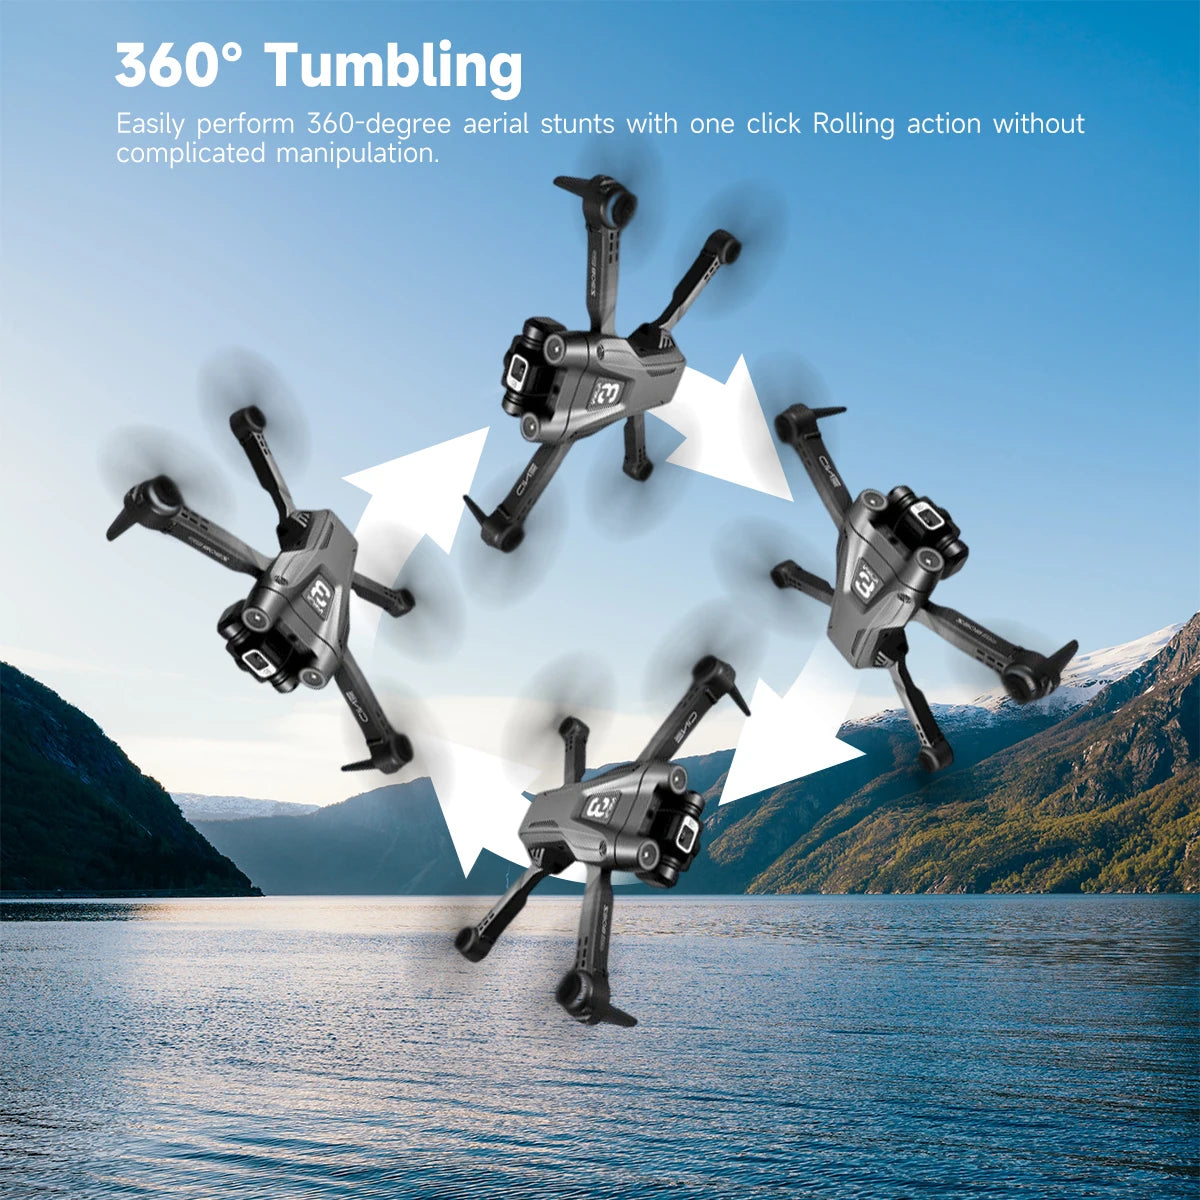 Z908 Pro Drone, 3609 tumbling easily perform 360-degree aerial stunts with